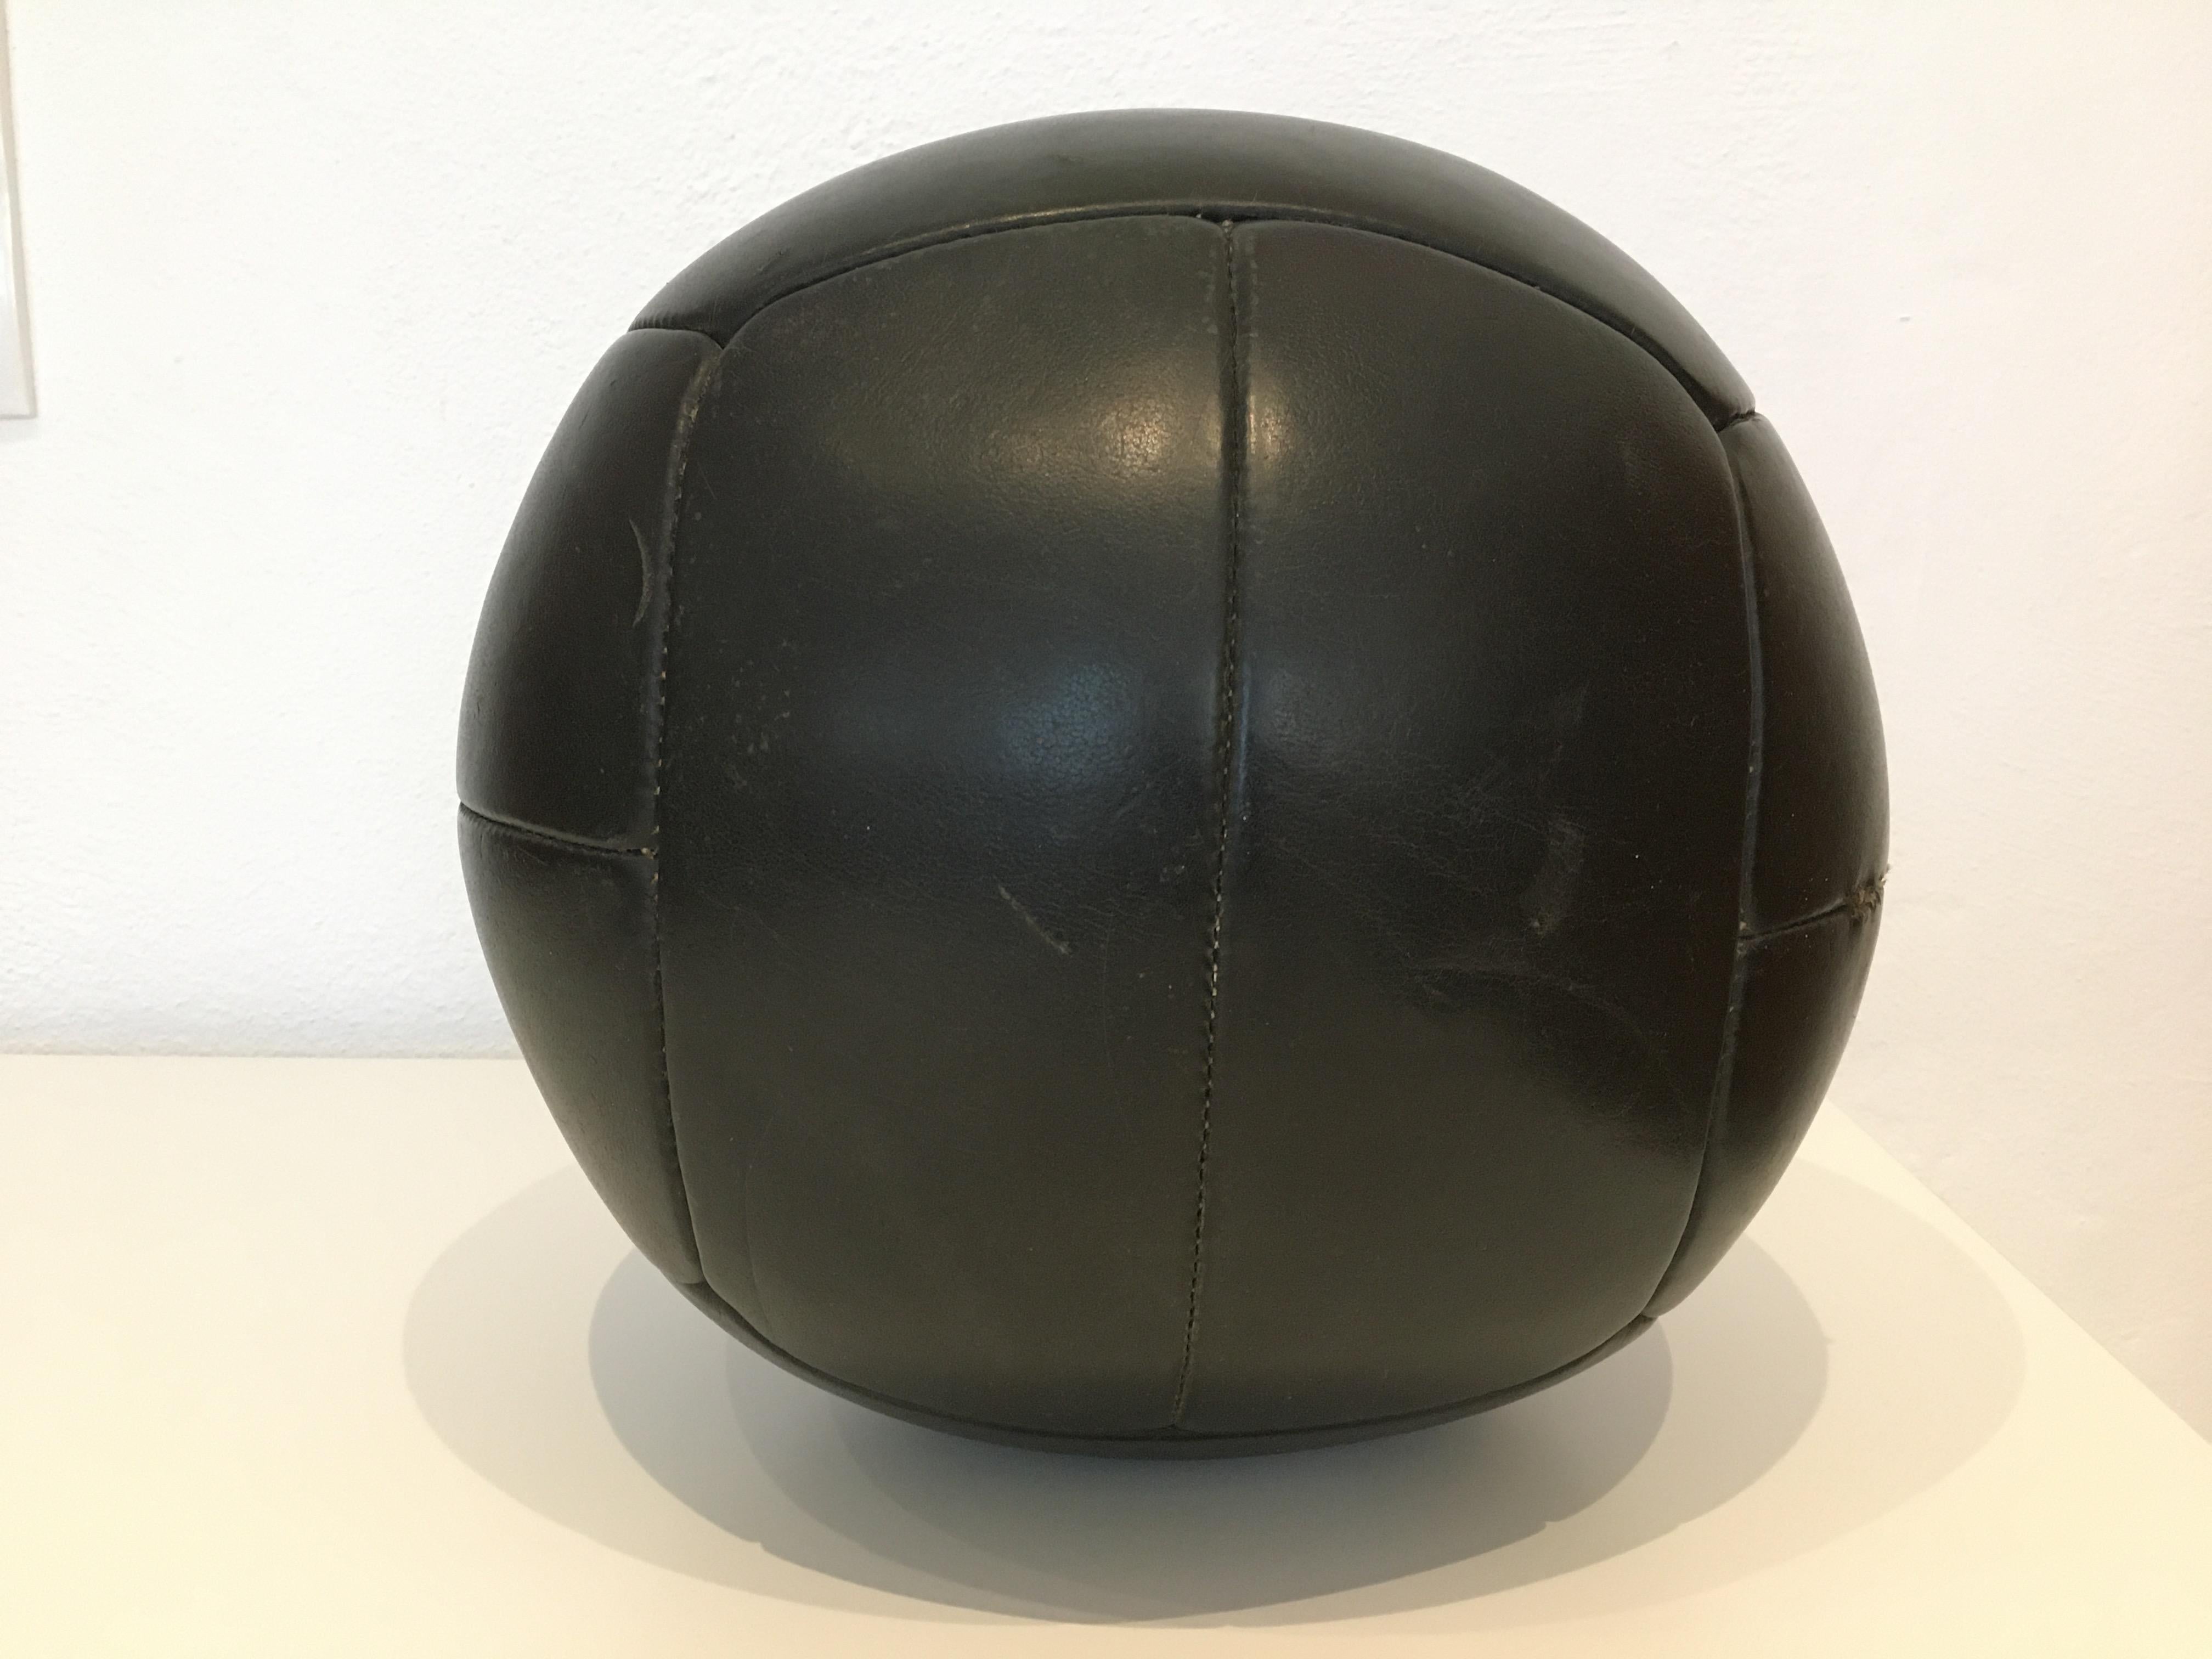 This medicine ball comes from the stock of an old Czech gymnasium. Made in the 1930s. Patina consistent with age and use. Cleaned and treated with a special leather care. Weight: 4kg. Measures: Diameter 1181 inch.